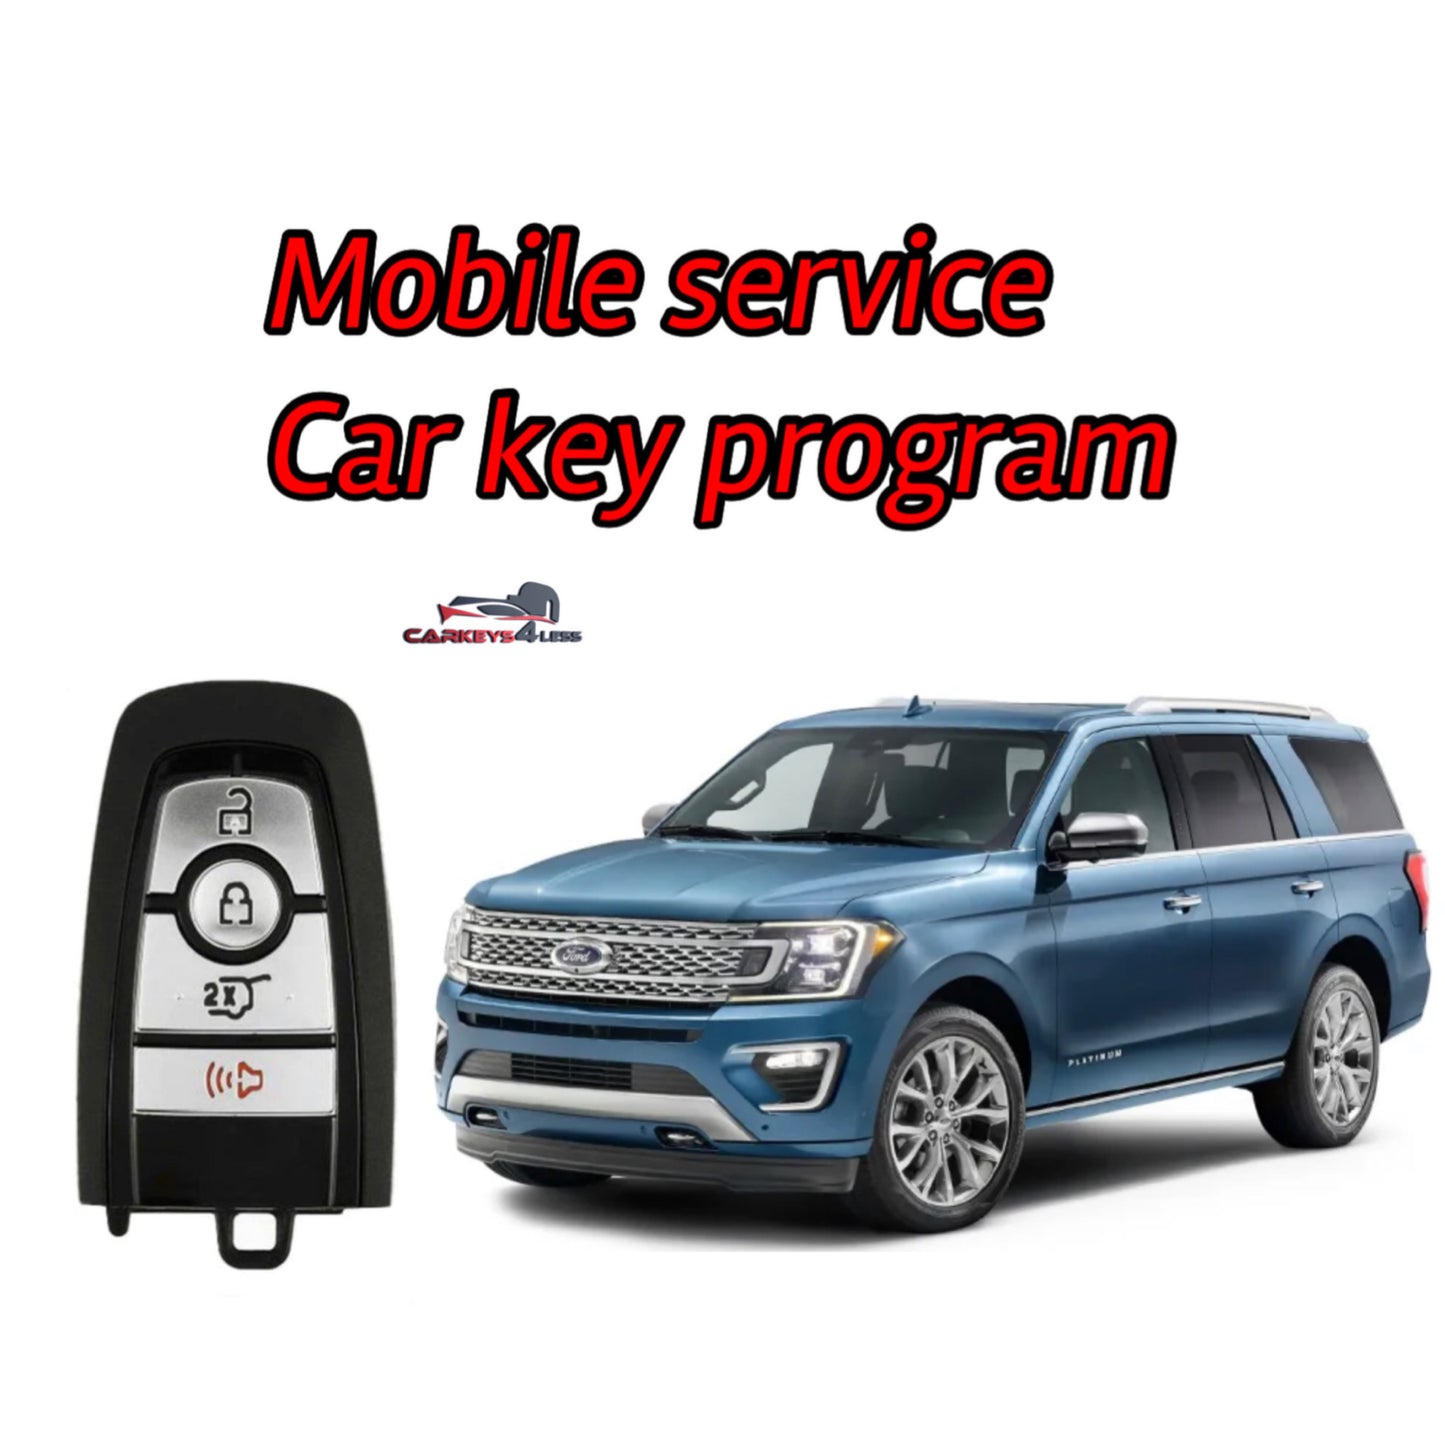 Mobile service for an aftermarket ford smart key replacement